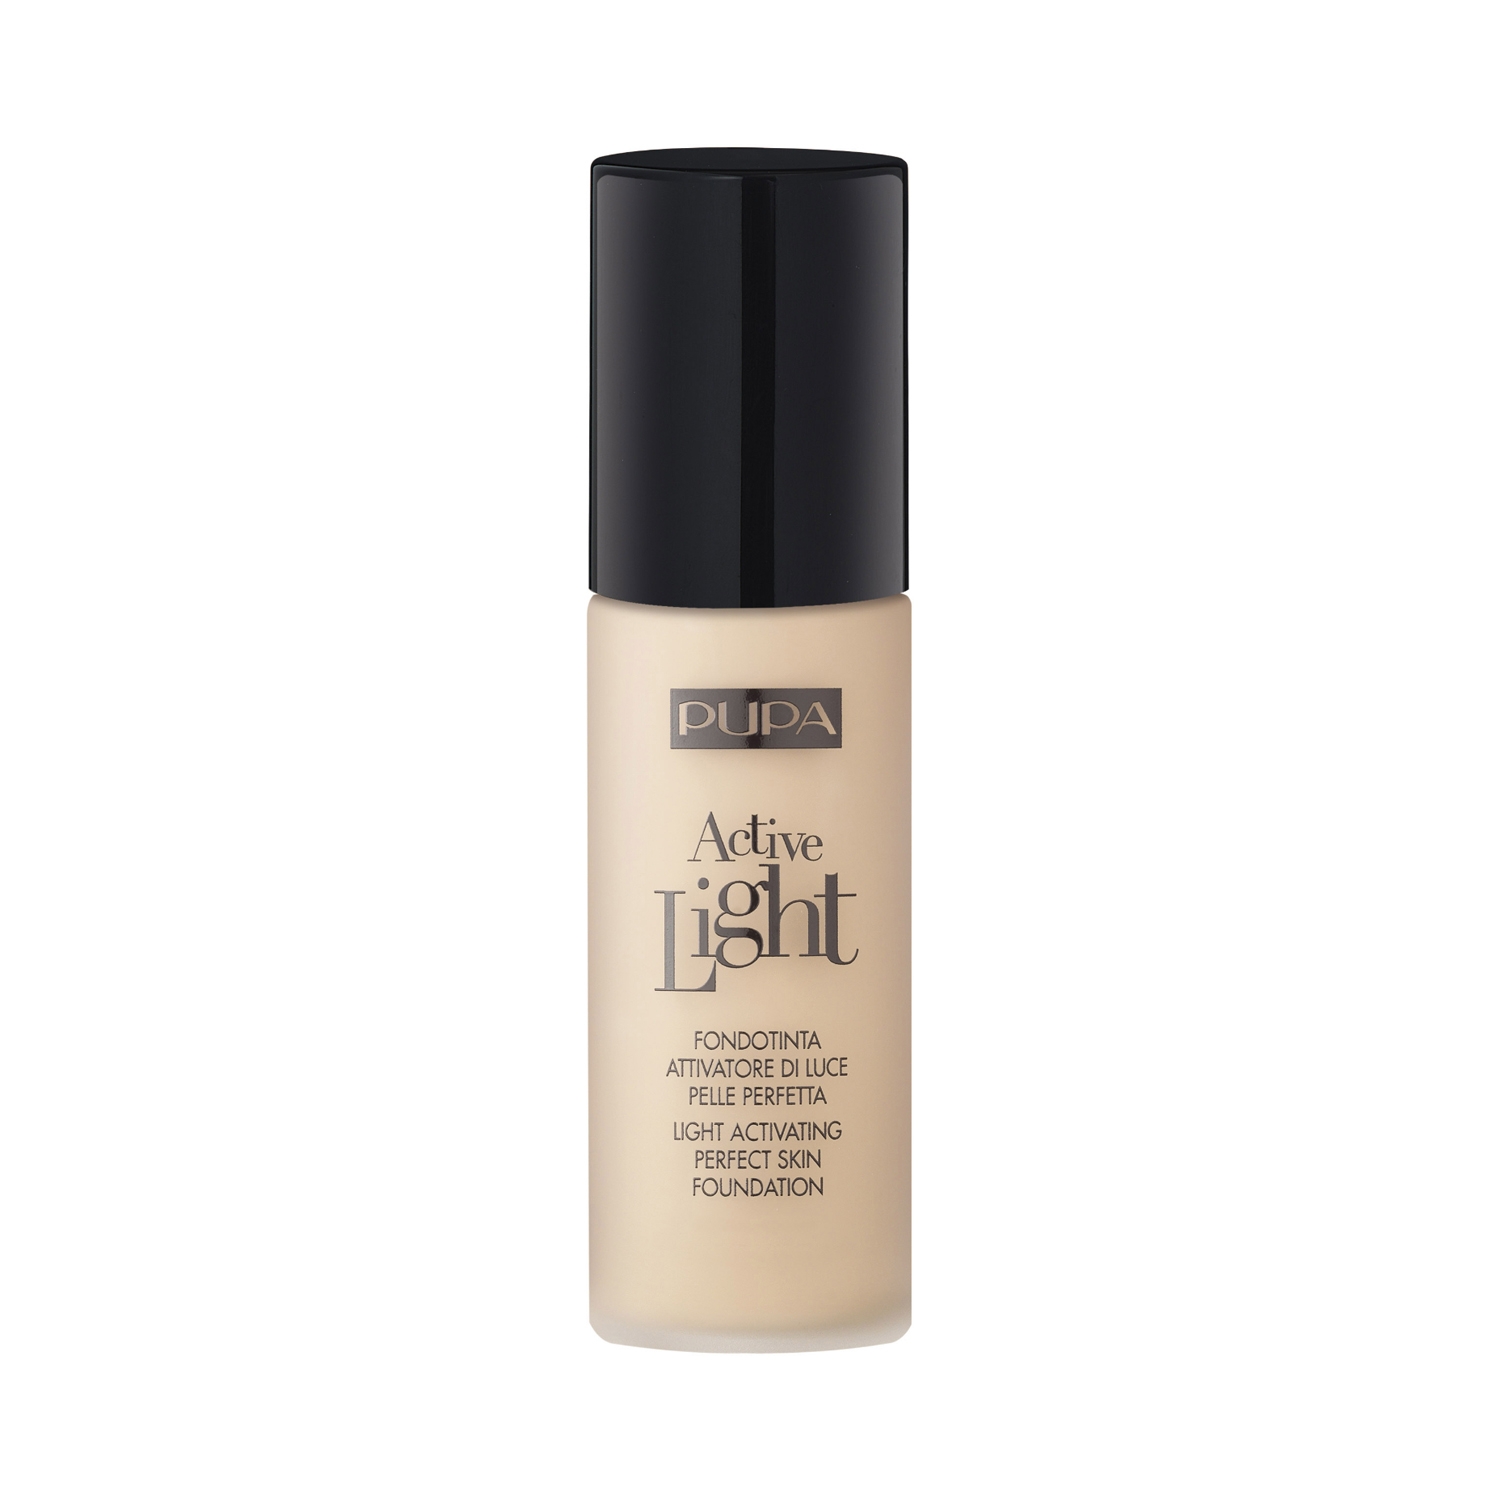 Pupa Milano Active Light Activating Perfect Skin Foundation - 011 Light Beige (30ml)